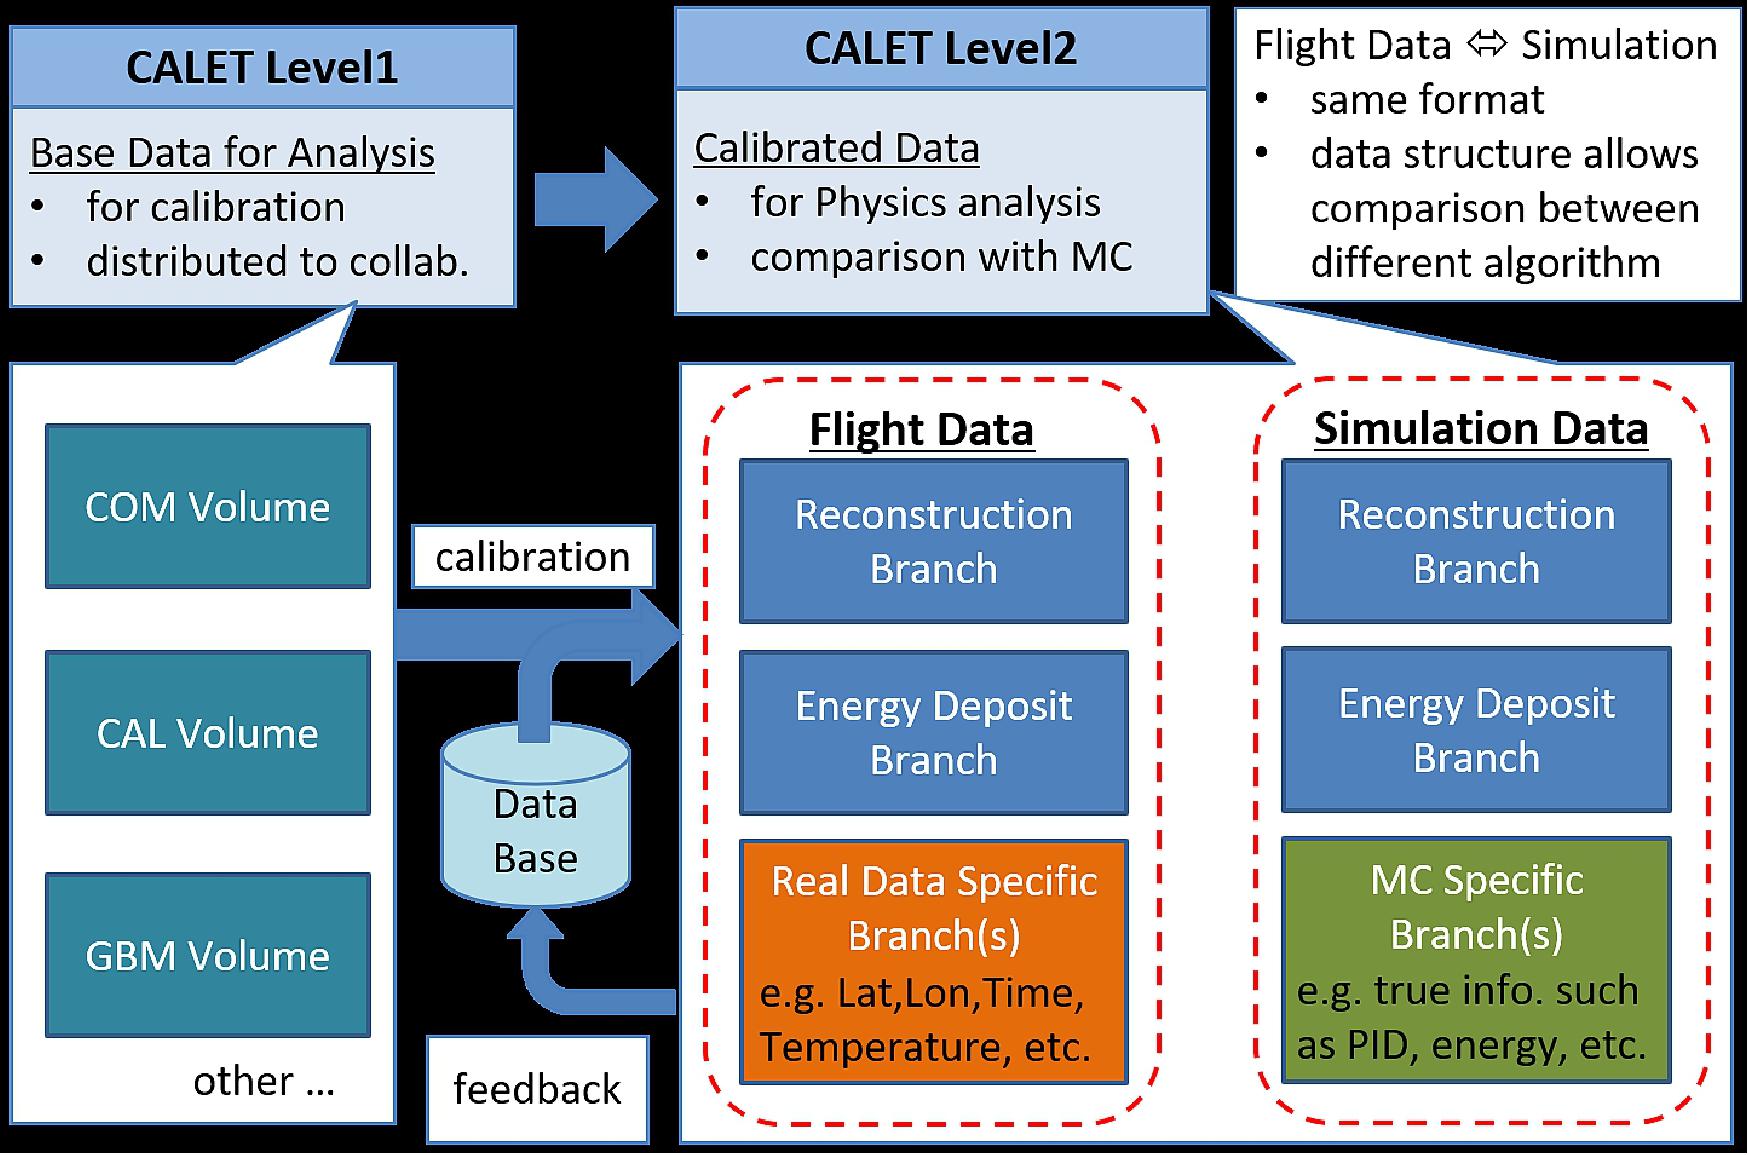 Figure 17: Data analysis flow for creating calibrated data (Level-2). The calibration parameters are stored in a database and are used for iterative improvements of calibration, event reconstruction, and MC data (image credit: JAXA/NASA, ISS-CALET Team)